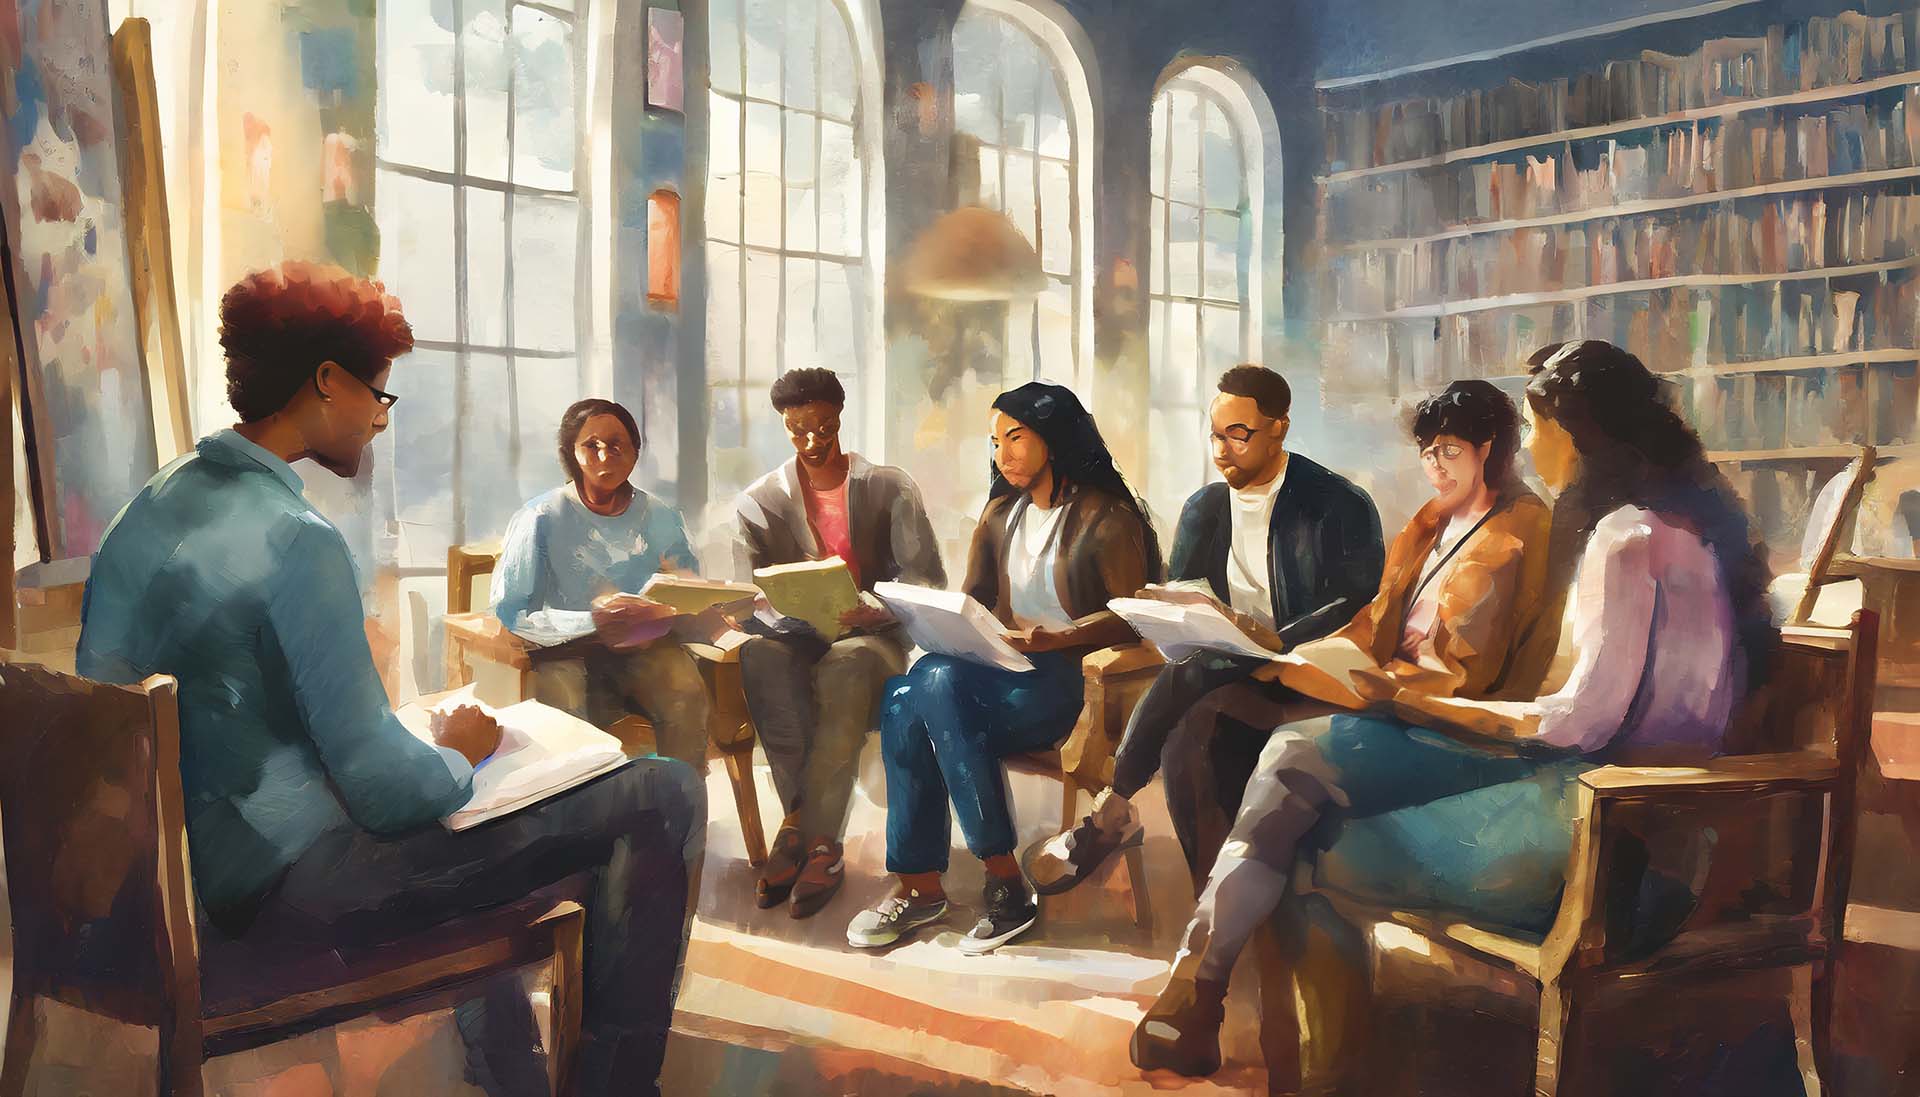 What is a humanist featured image. A group of people in a library having a discussion